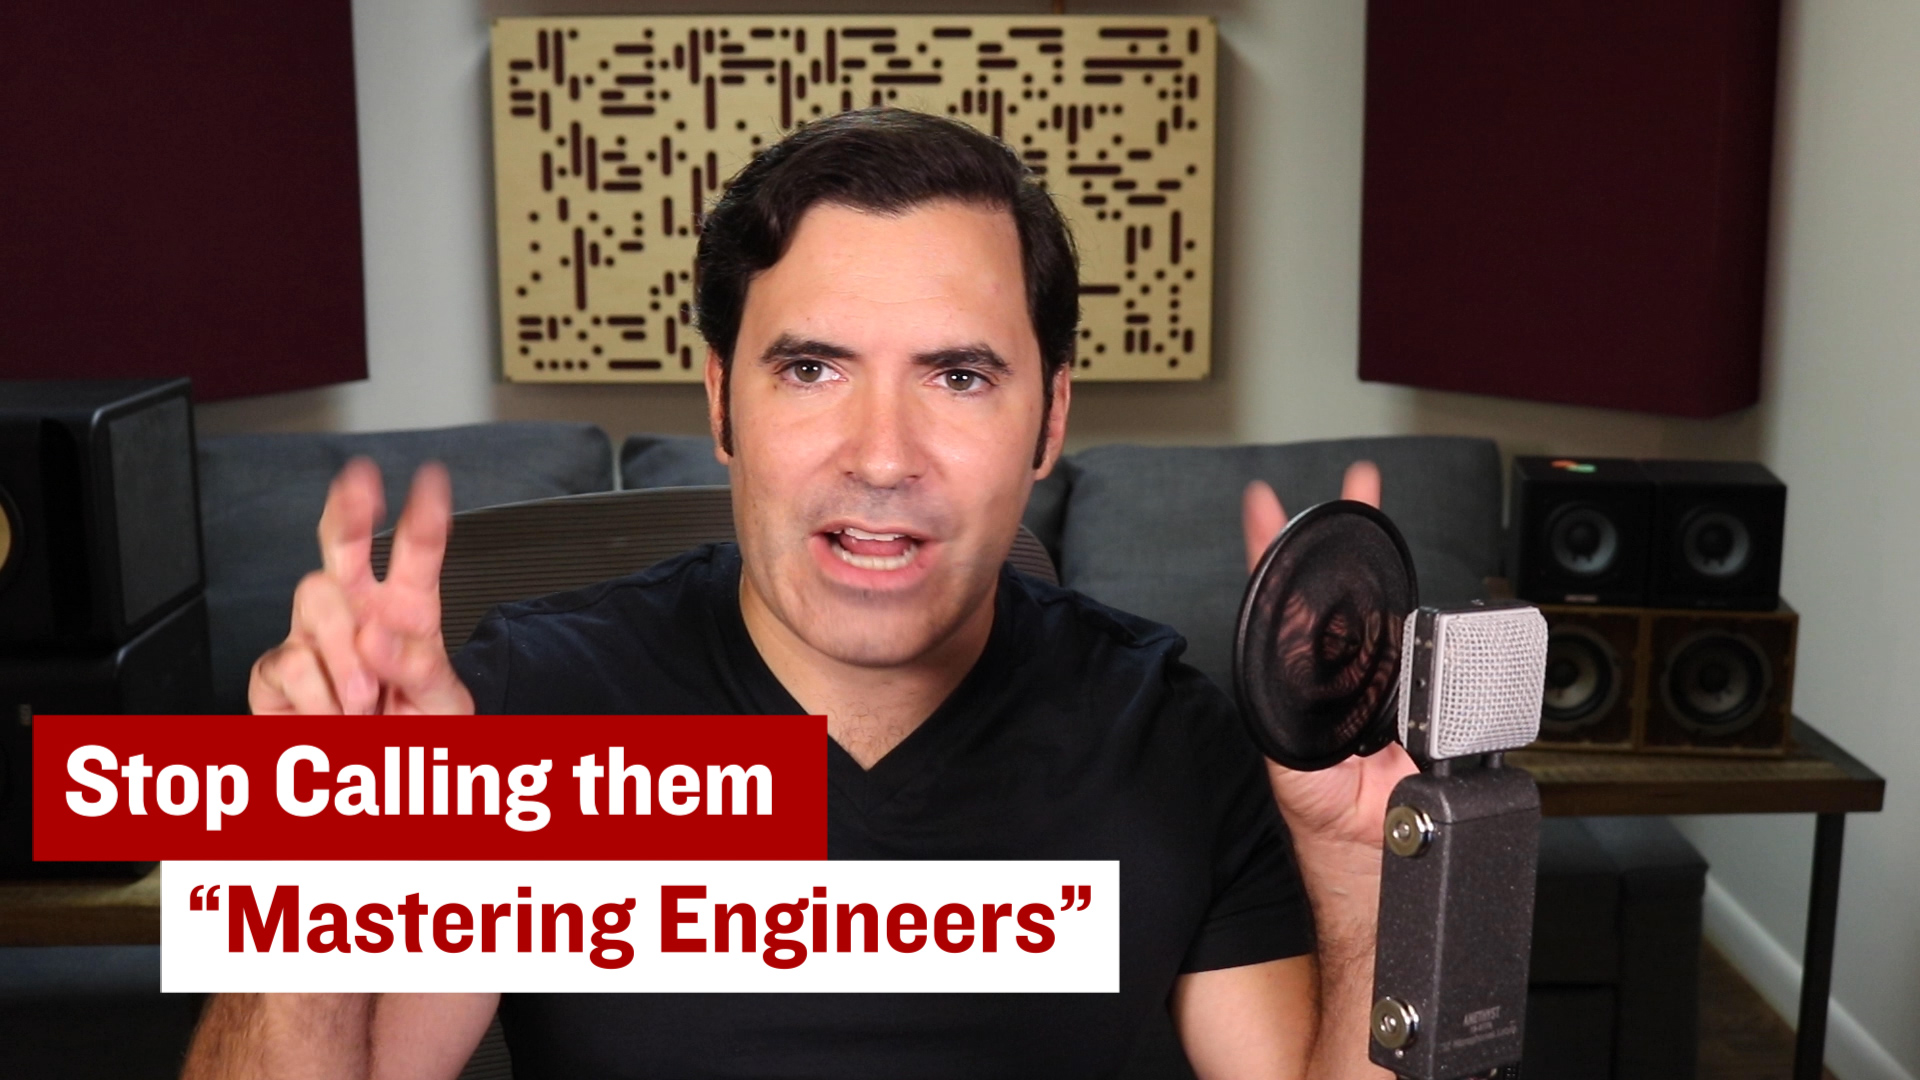 Don’t Call Them “Mastering Engineers”, Call Them This Instead